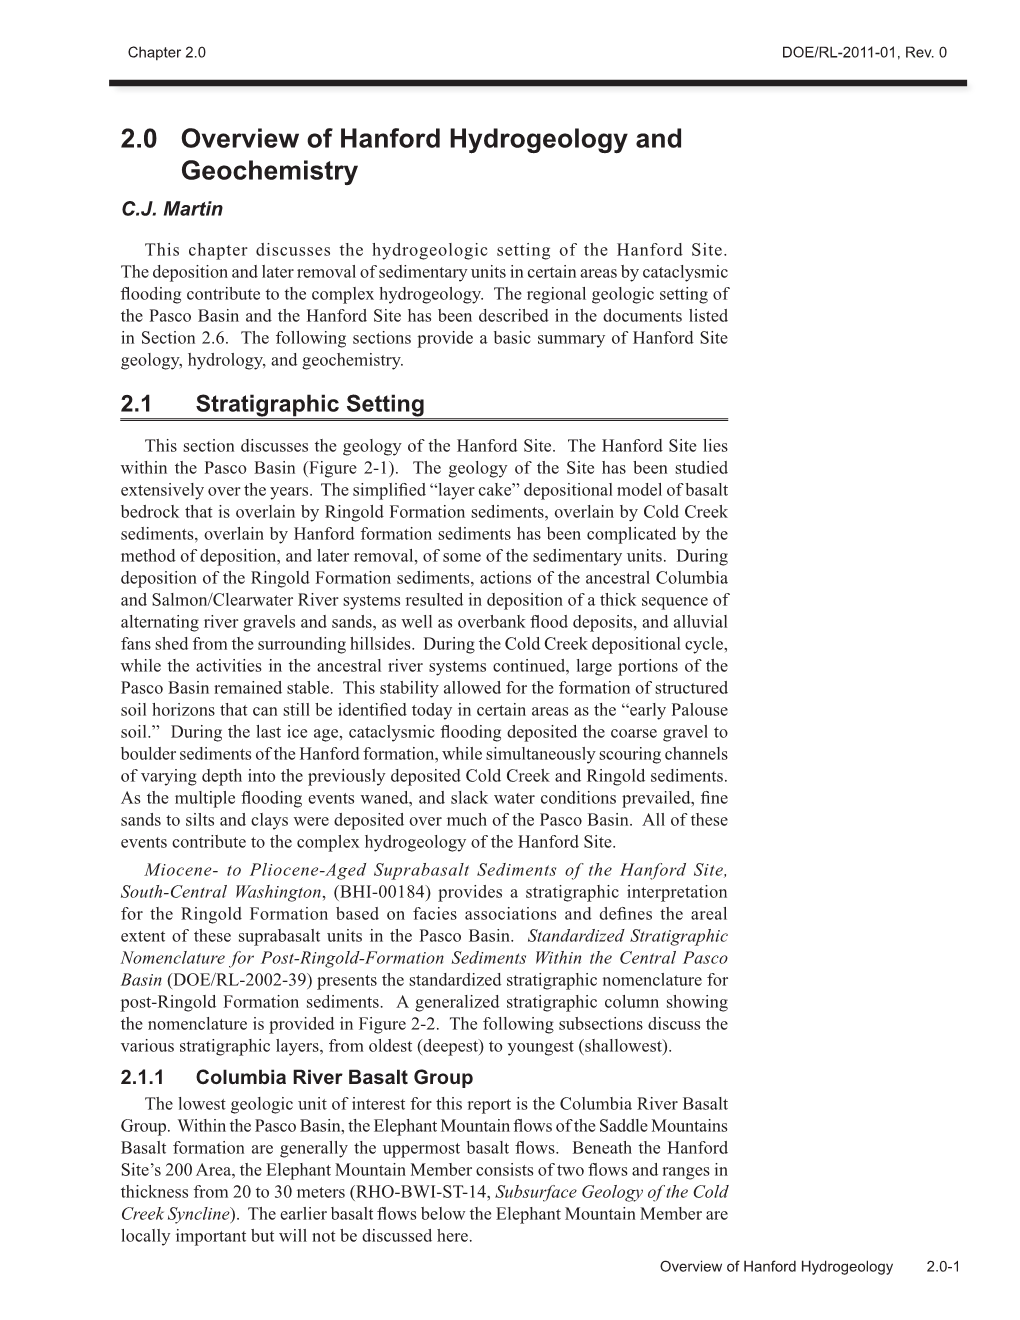 2.0 Overview of Hanford Hydrogeology and Geochemistry C.J